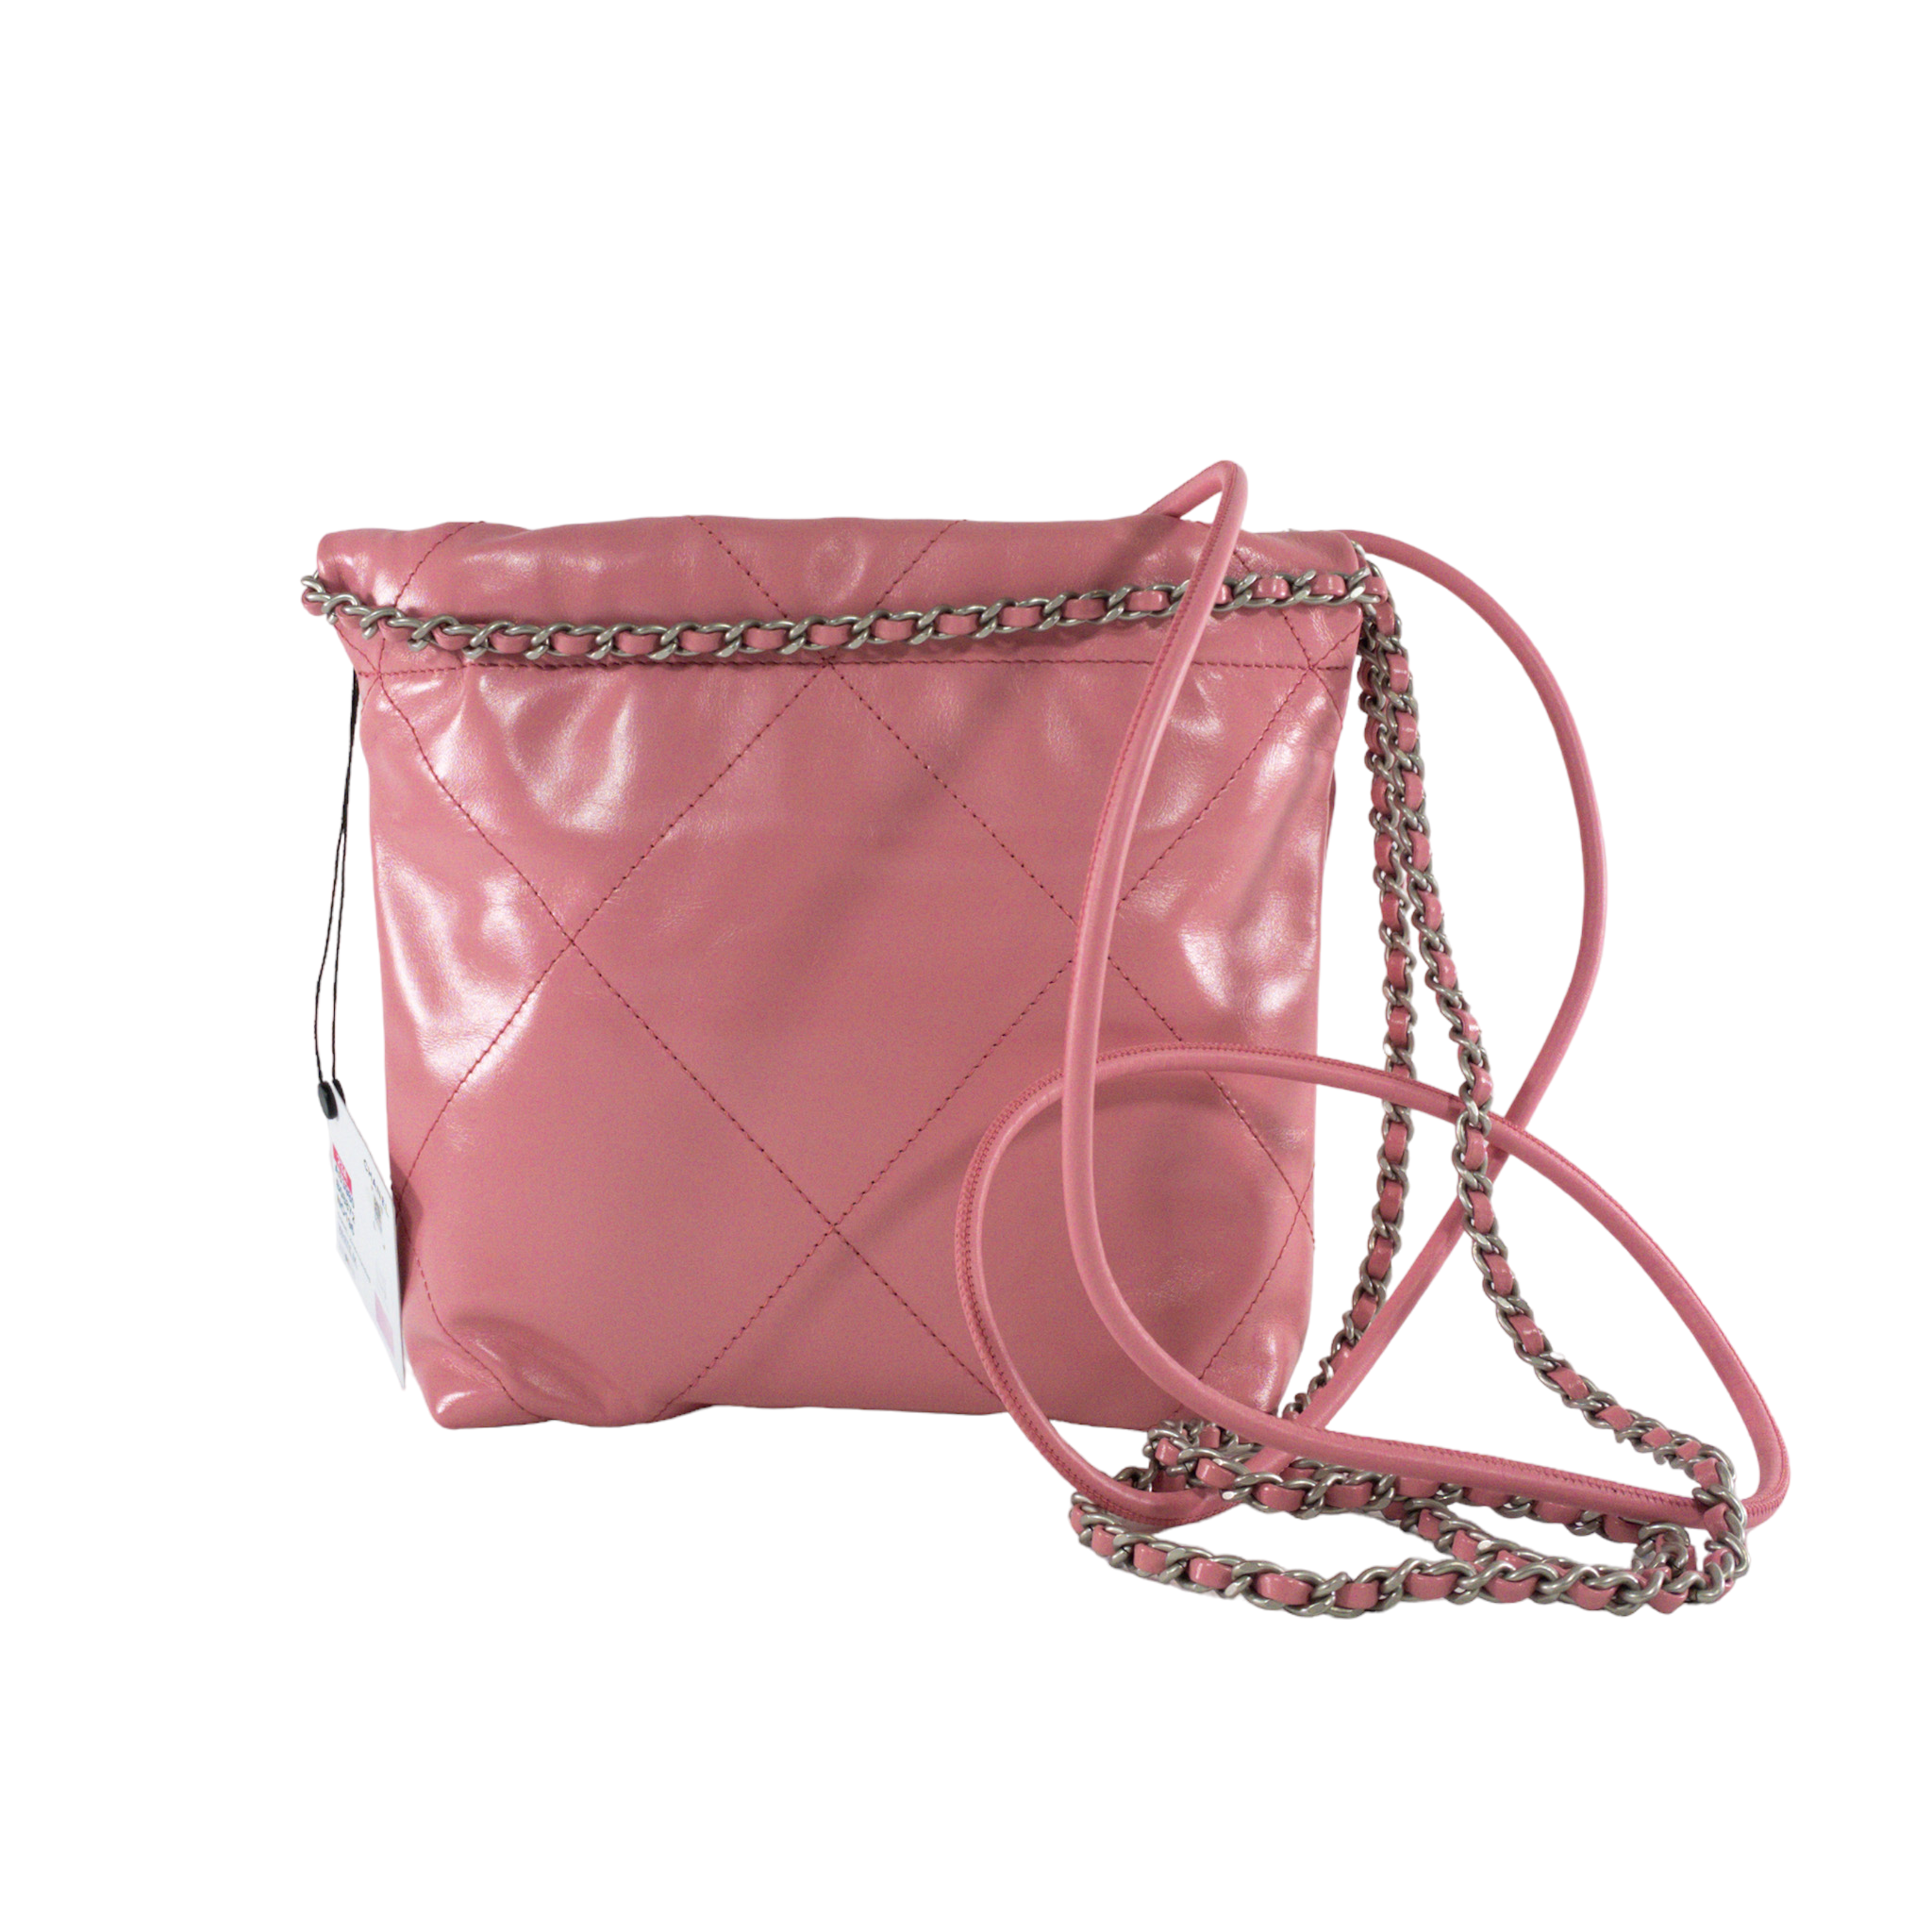 Chanel Pink Quilted Leather Small 22 Hobo Chanel